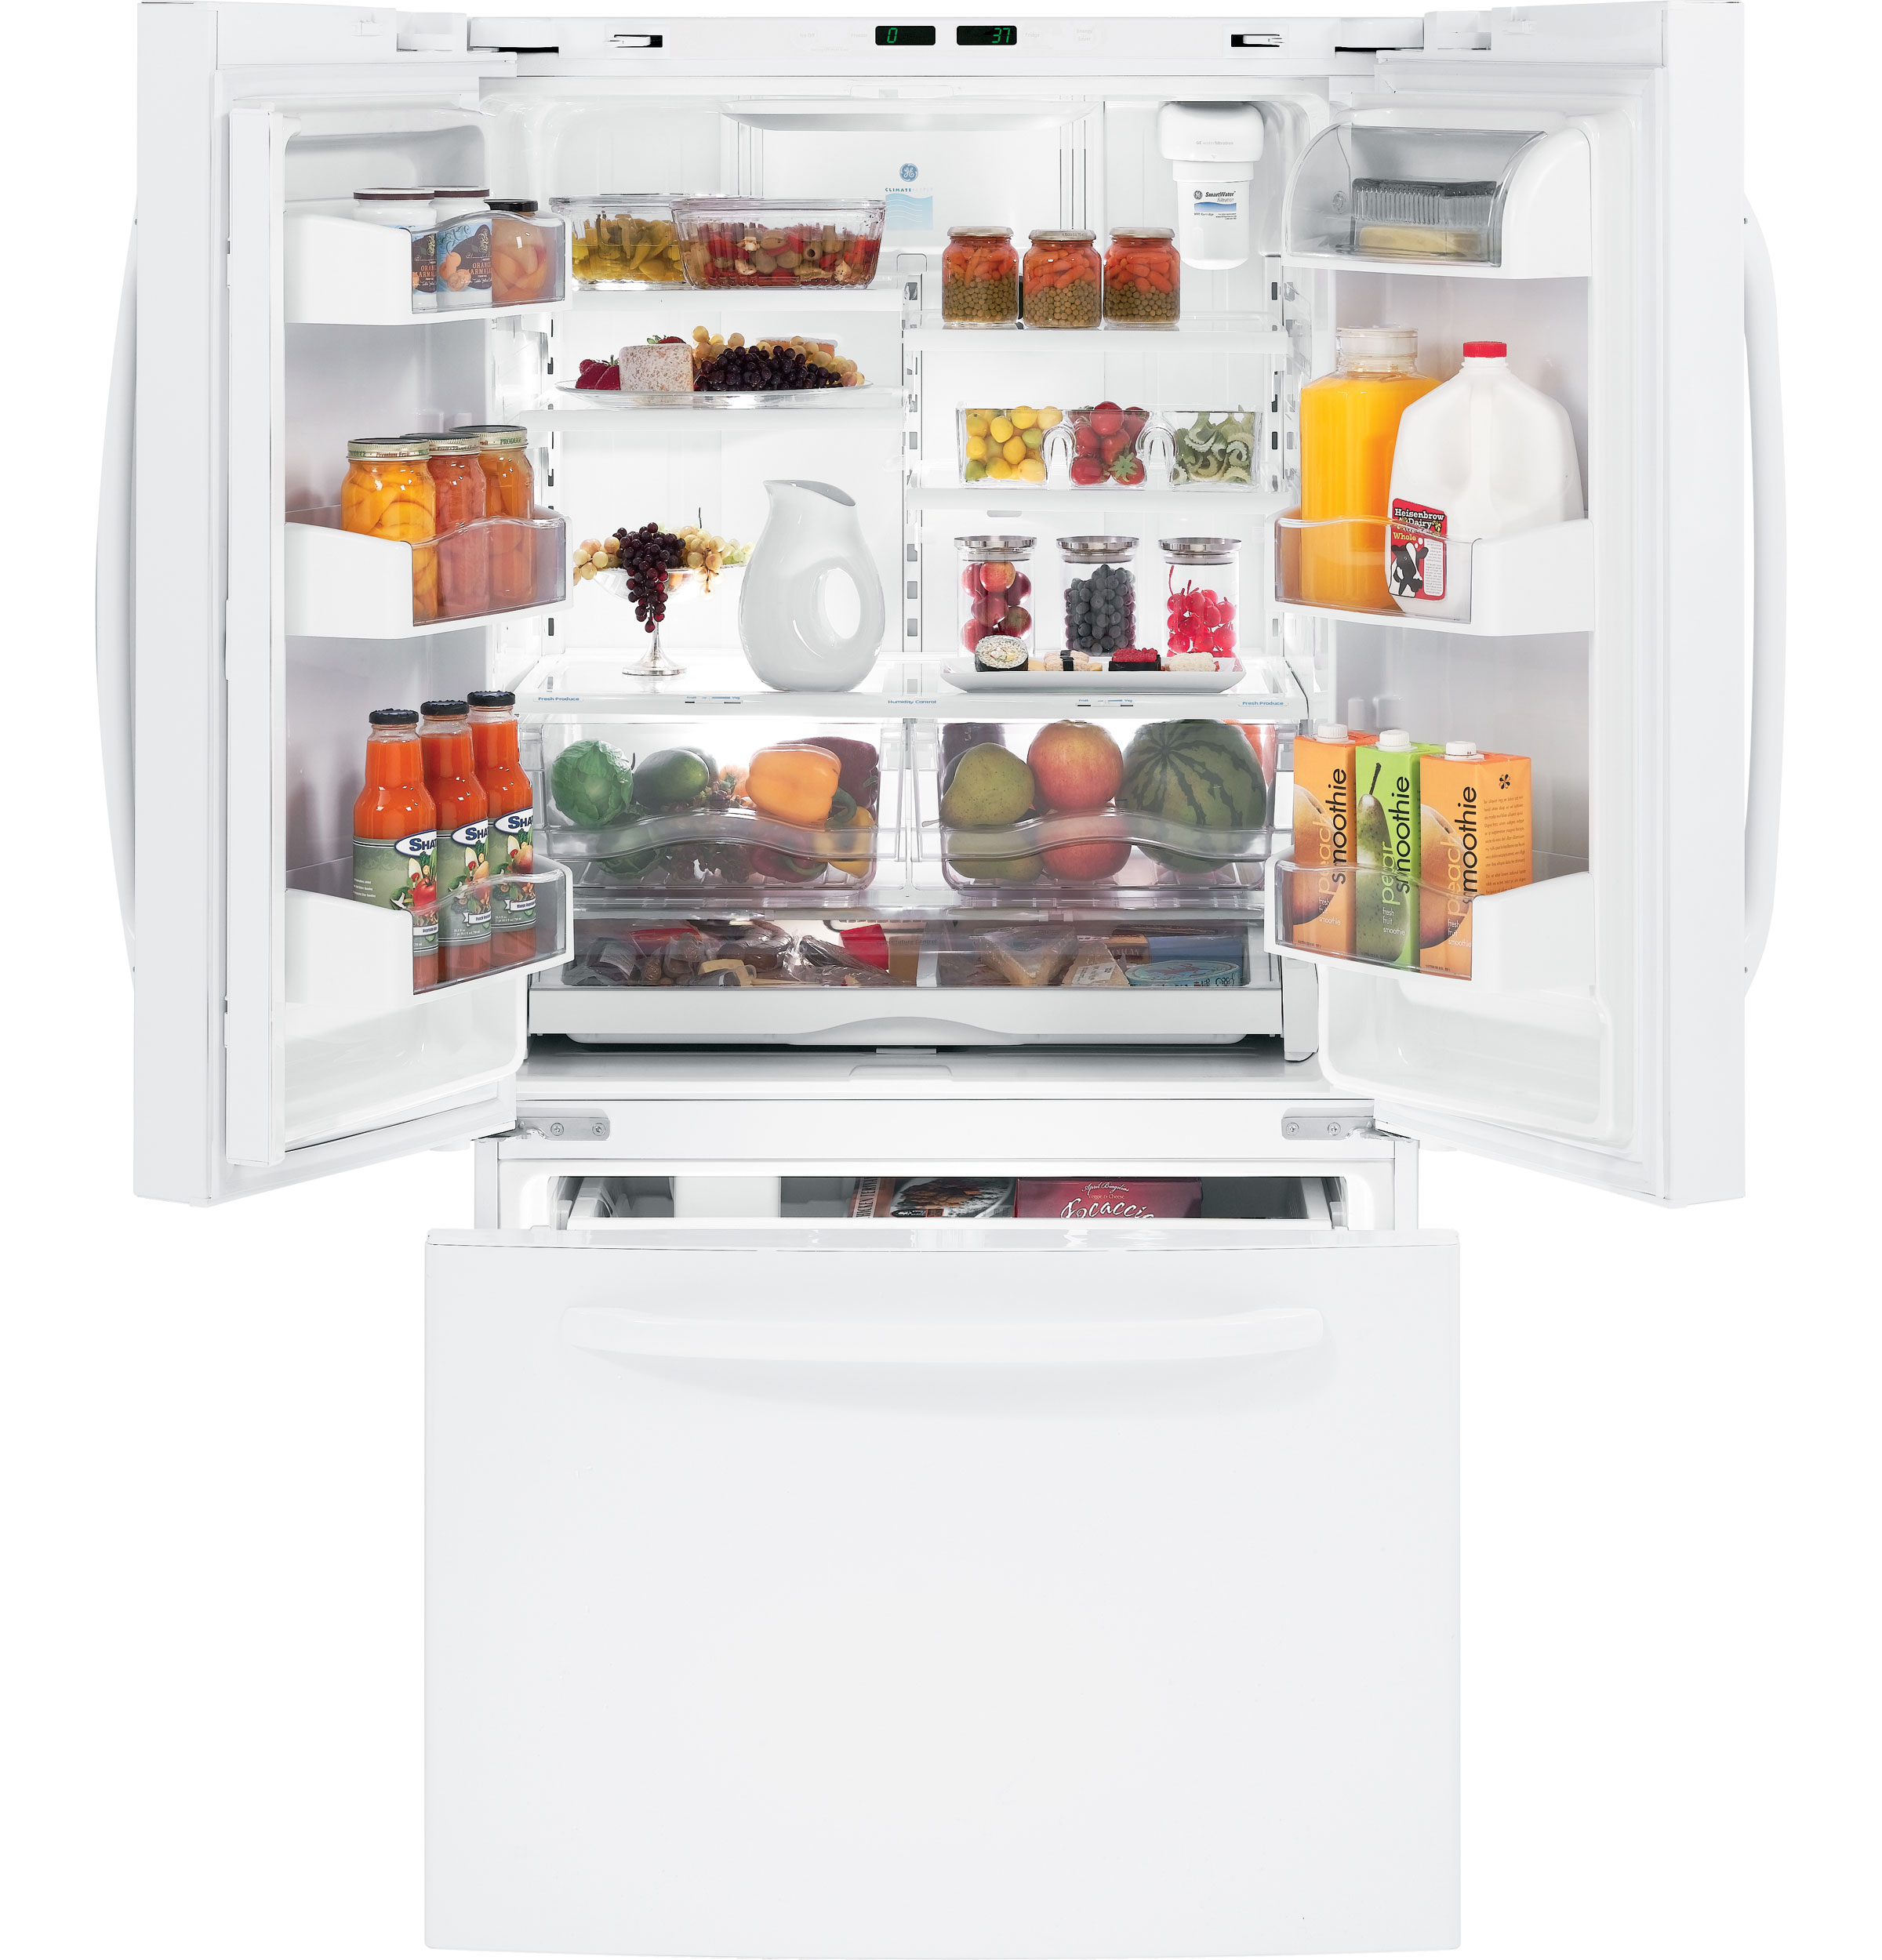 GE® ENERGY STAR® 25.9 Cu. Ft. French-Door Refrigerator with Icemaker